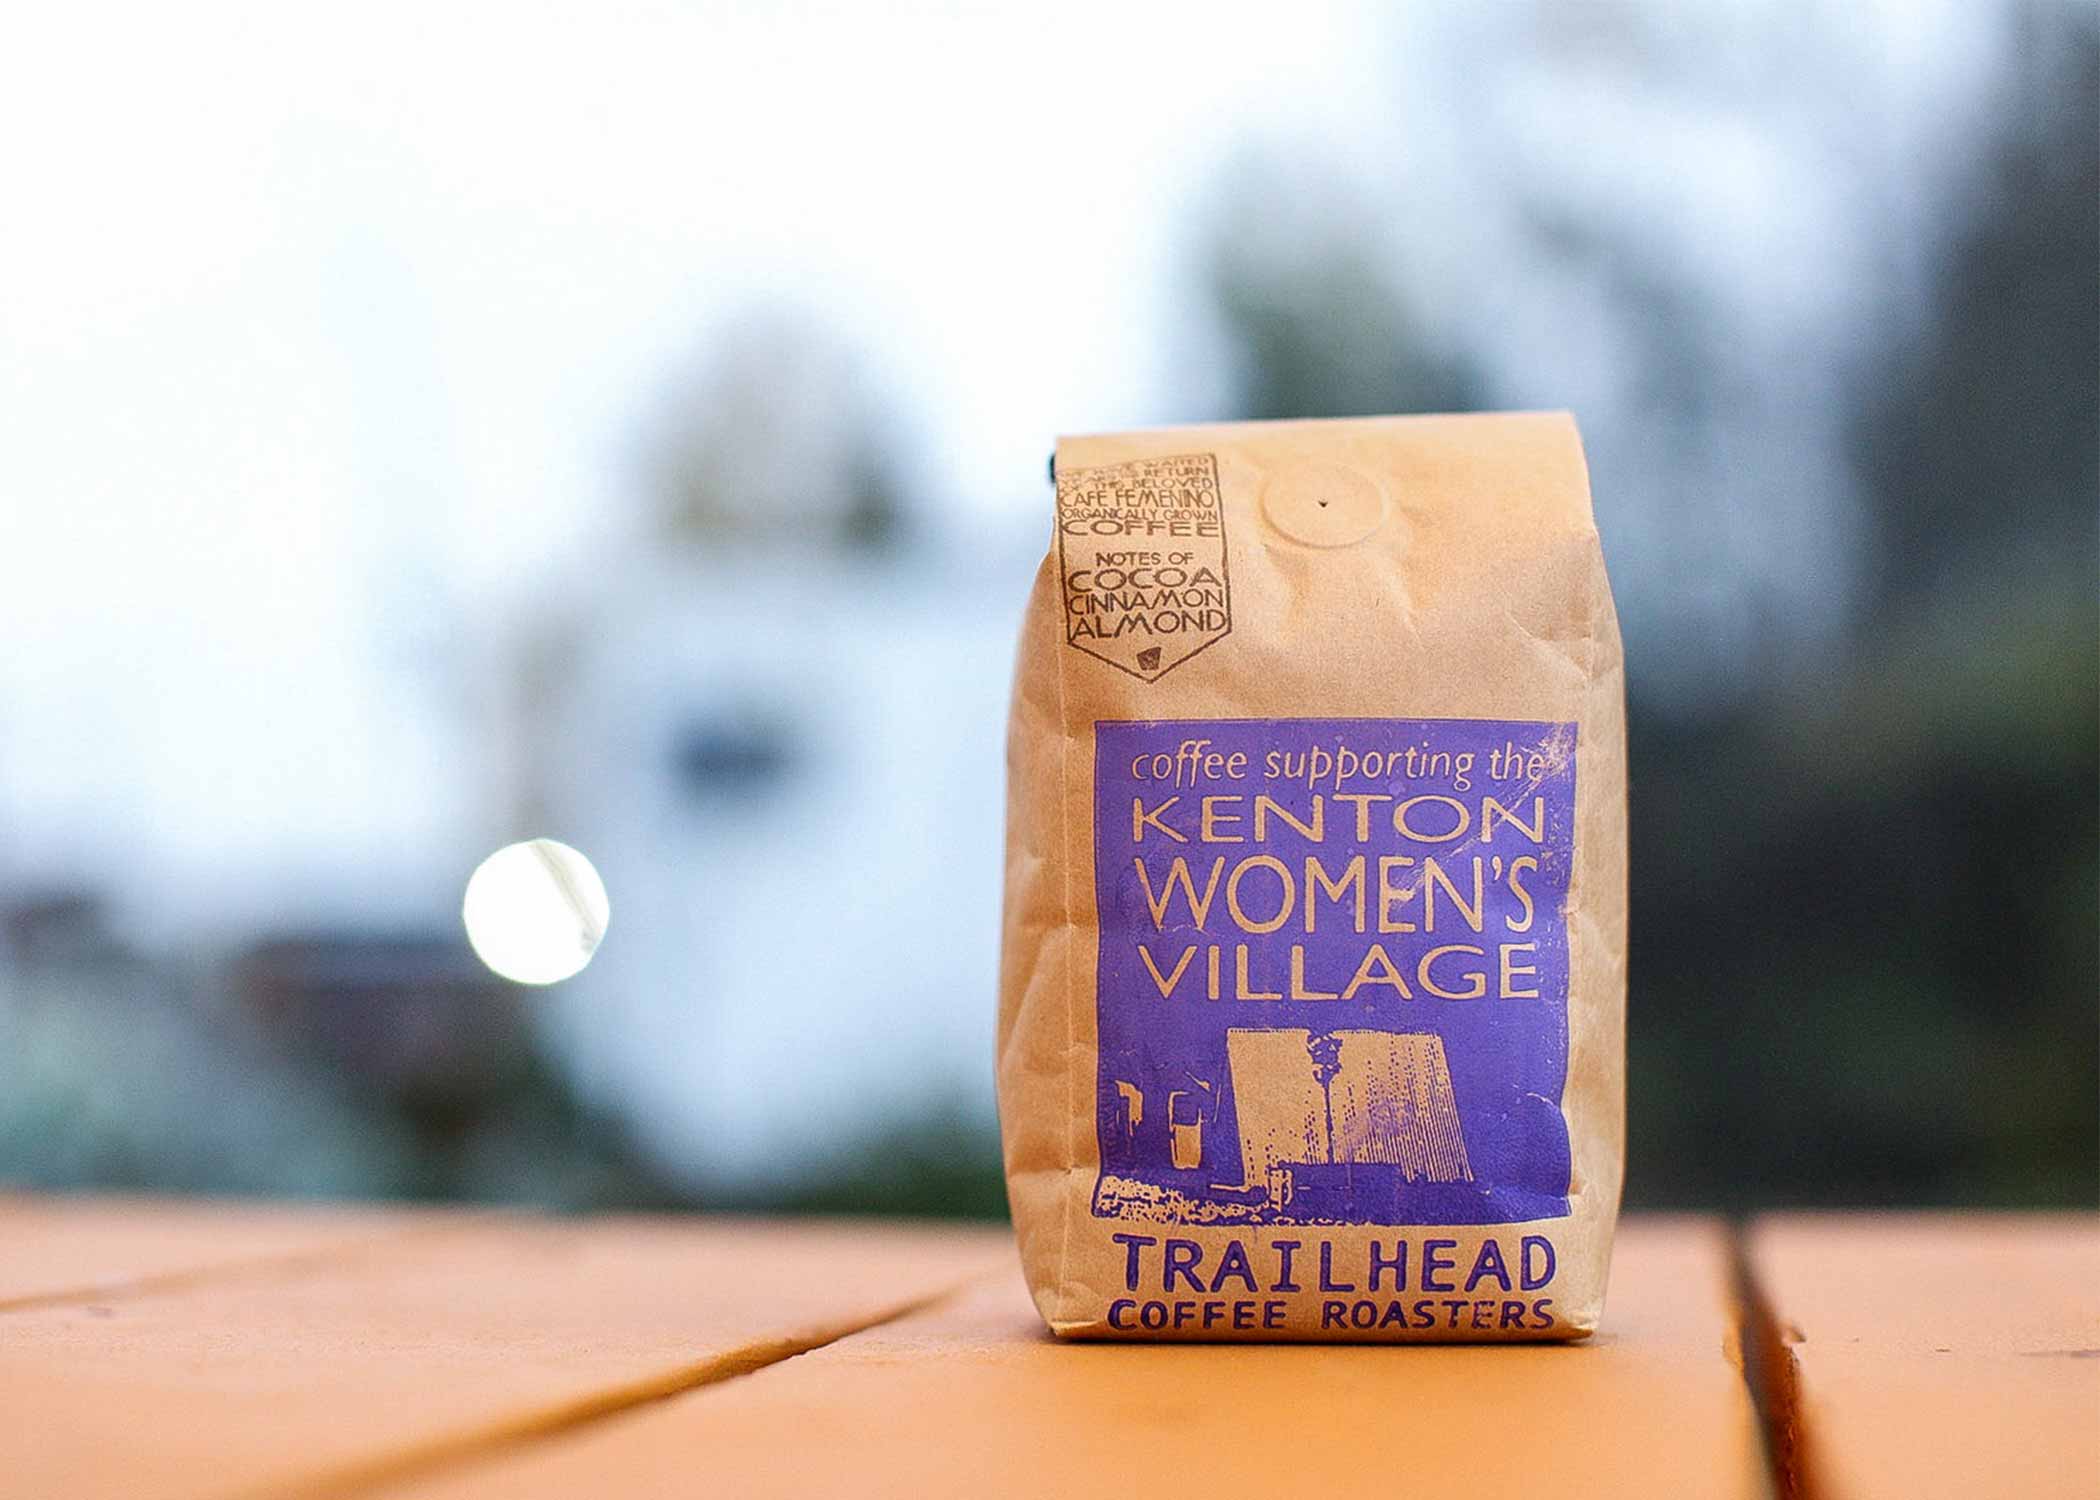 A bag of coffee promoting Kenton Women's Village on the label